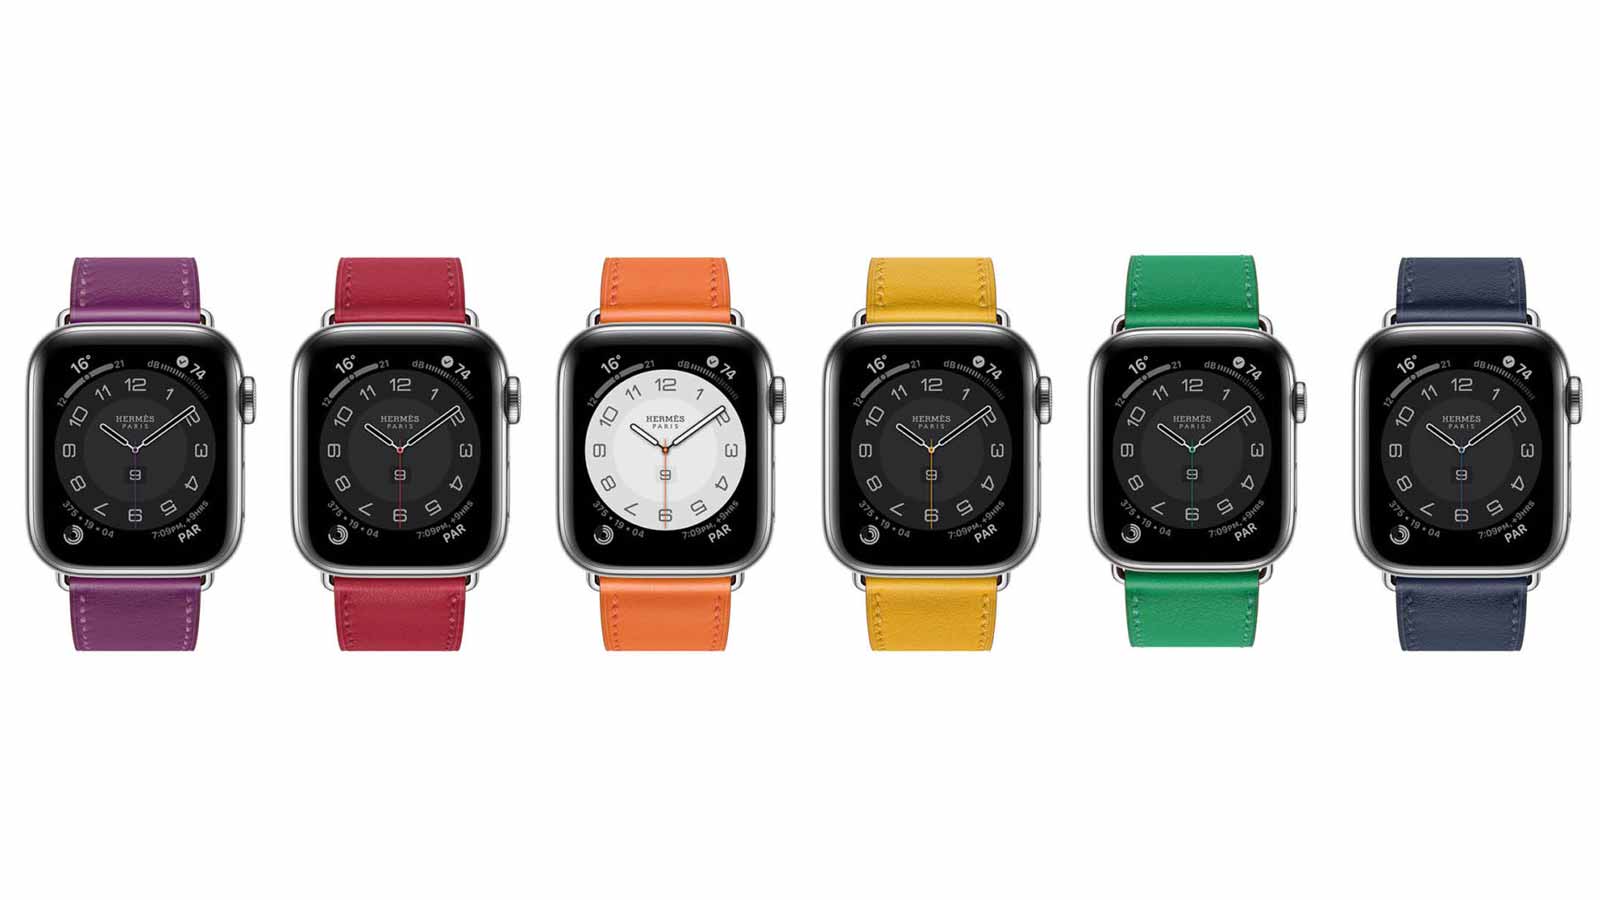 How to get the Hermès and Nike watch faces on Apple Watch